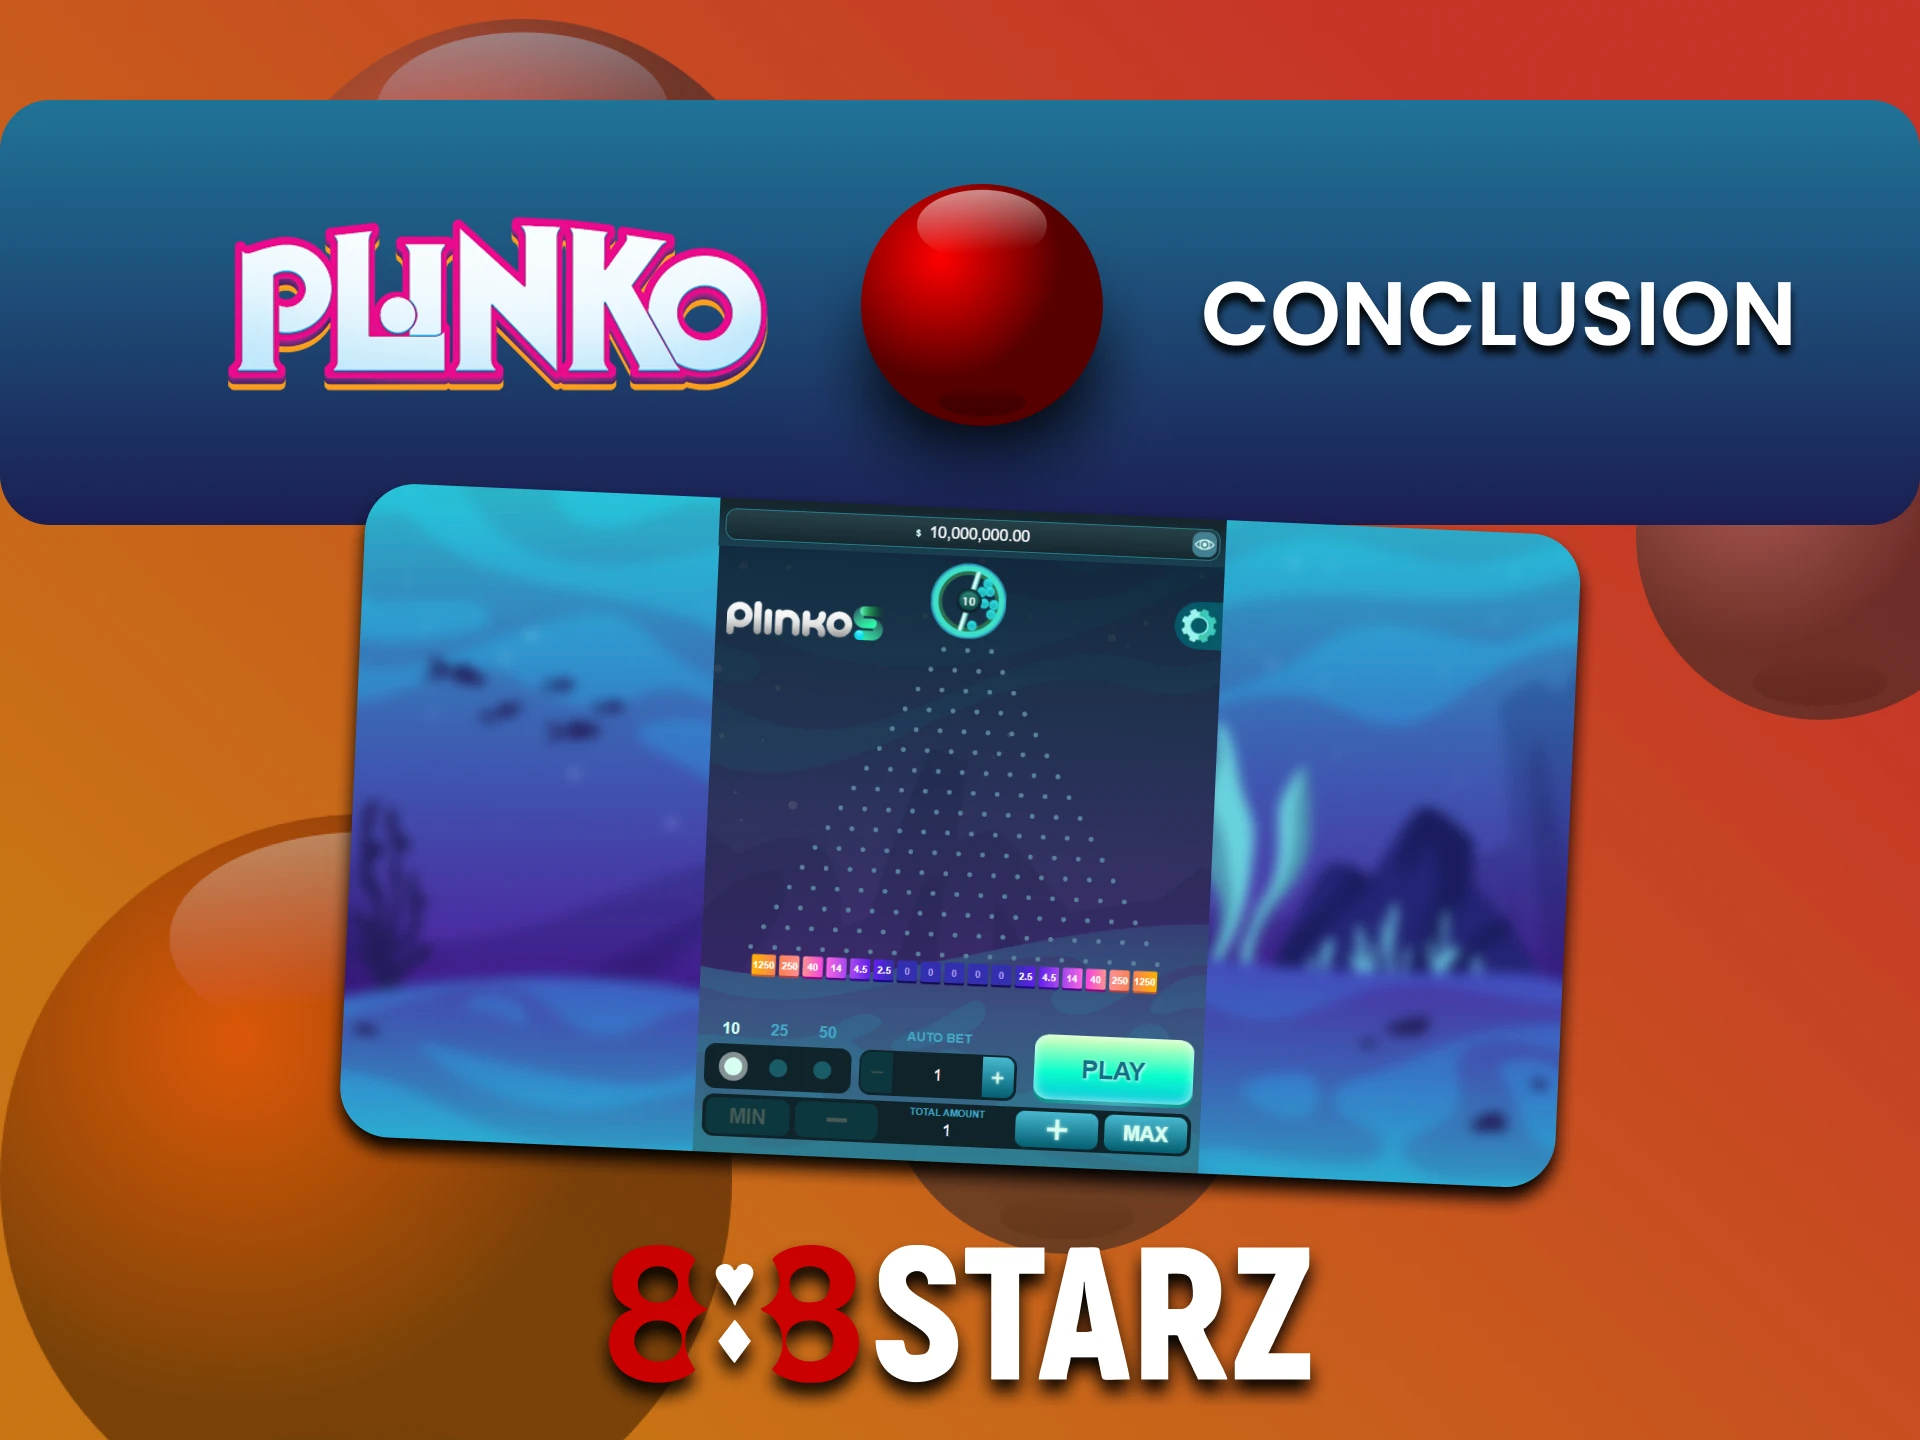 888starz is the choice of many users for playing Plinko.